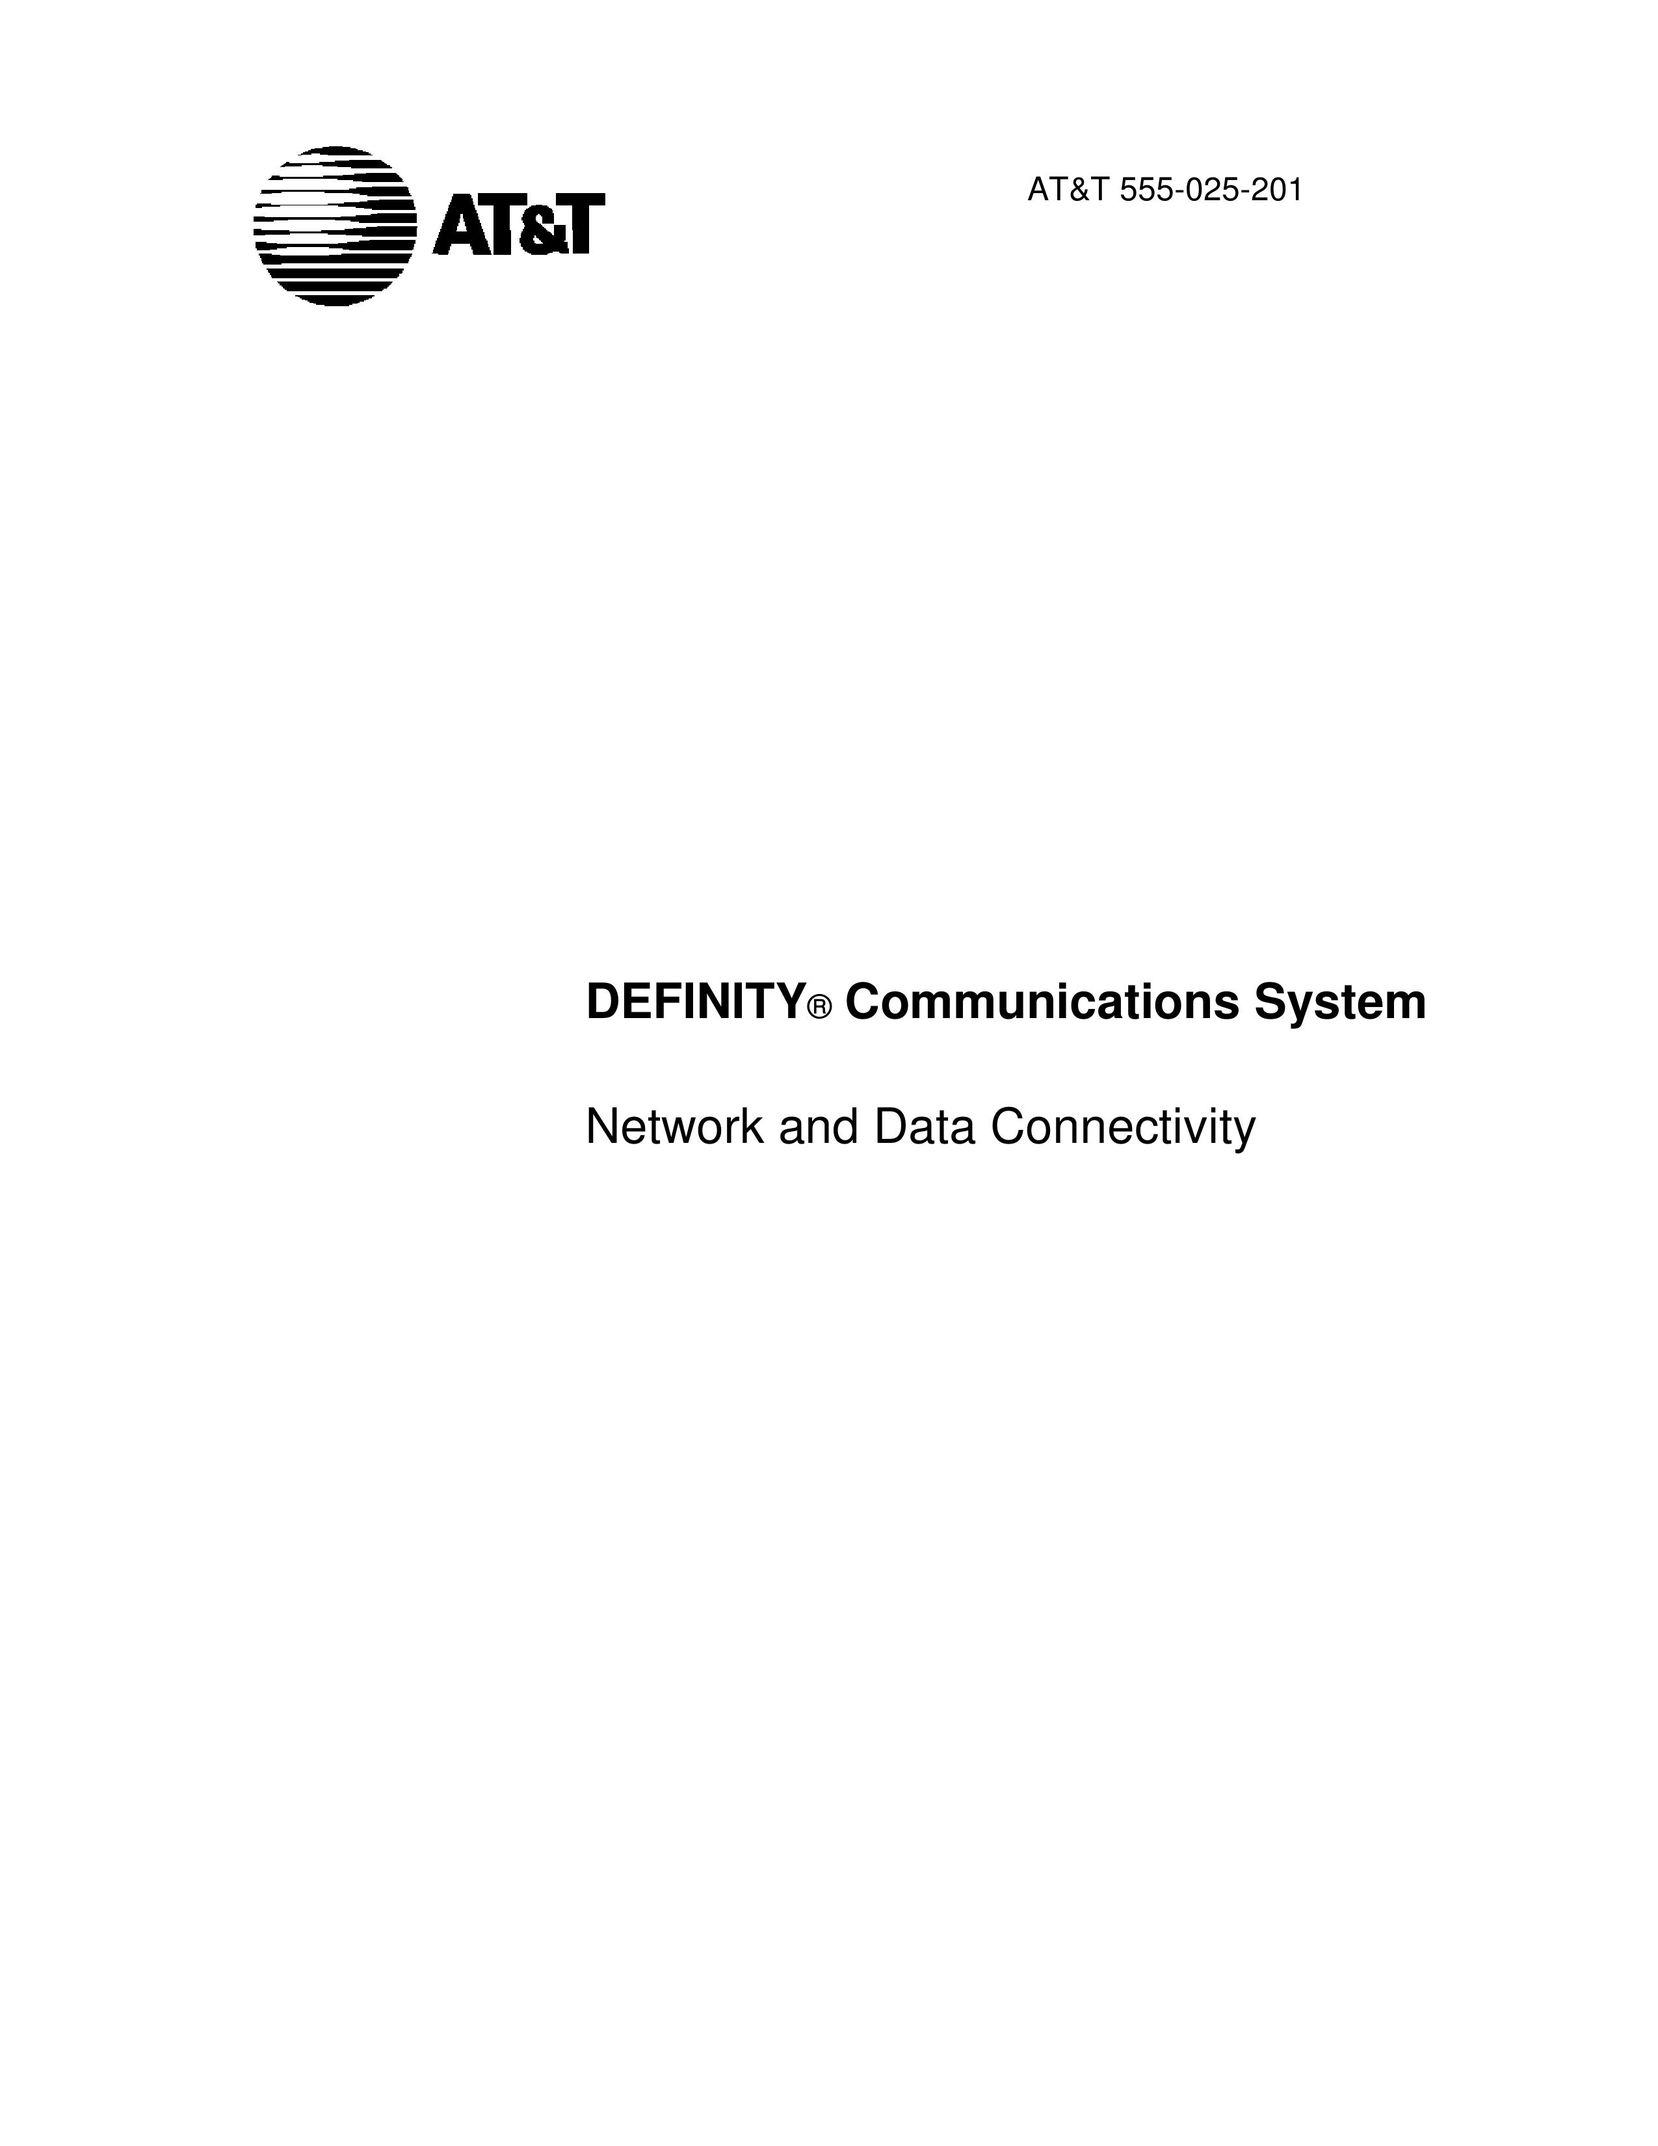 AT&T 7200 series Network Router User Manual